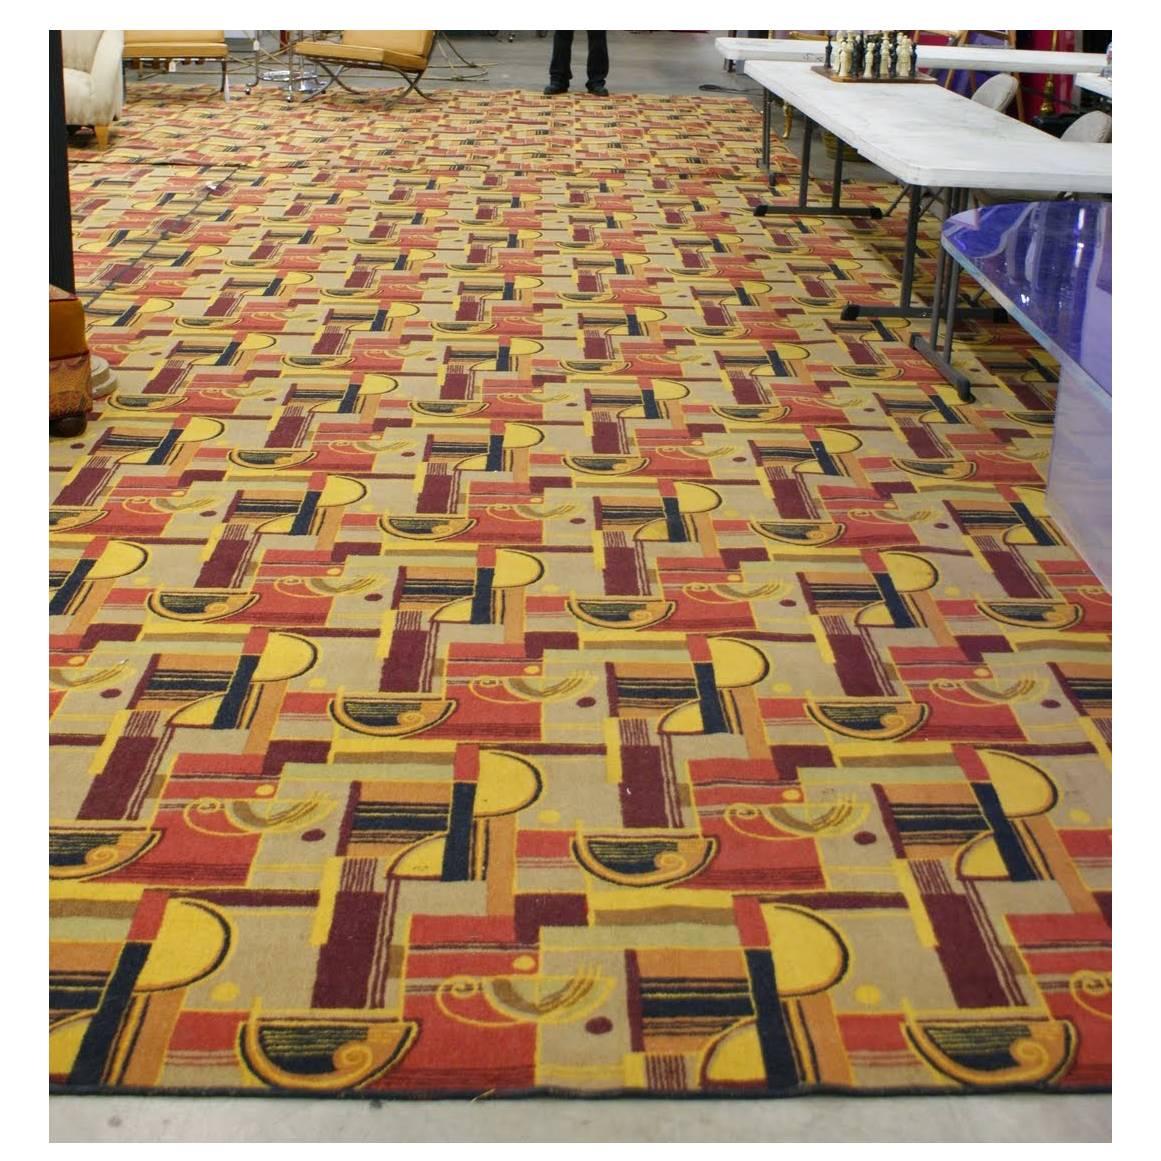 Large Art Deco style Area rug featuring a multicolored geometric streamline pattern with warm reds, browns yellows, and beige tones, much like those from Edward Fields. This rug is flooring taken from the RMS Queen Mary in the 1970s and made into a